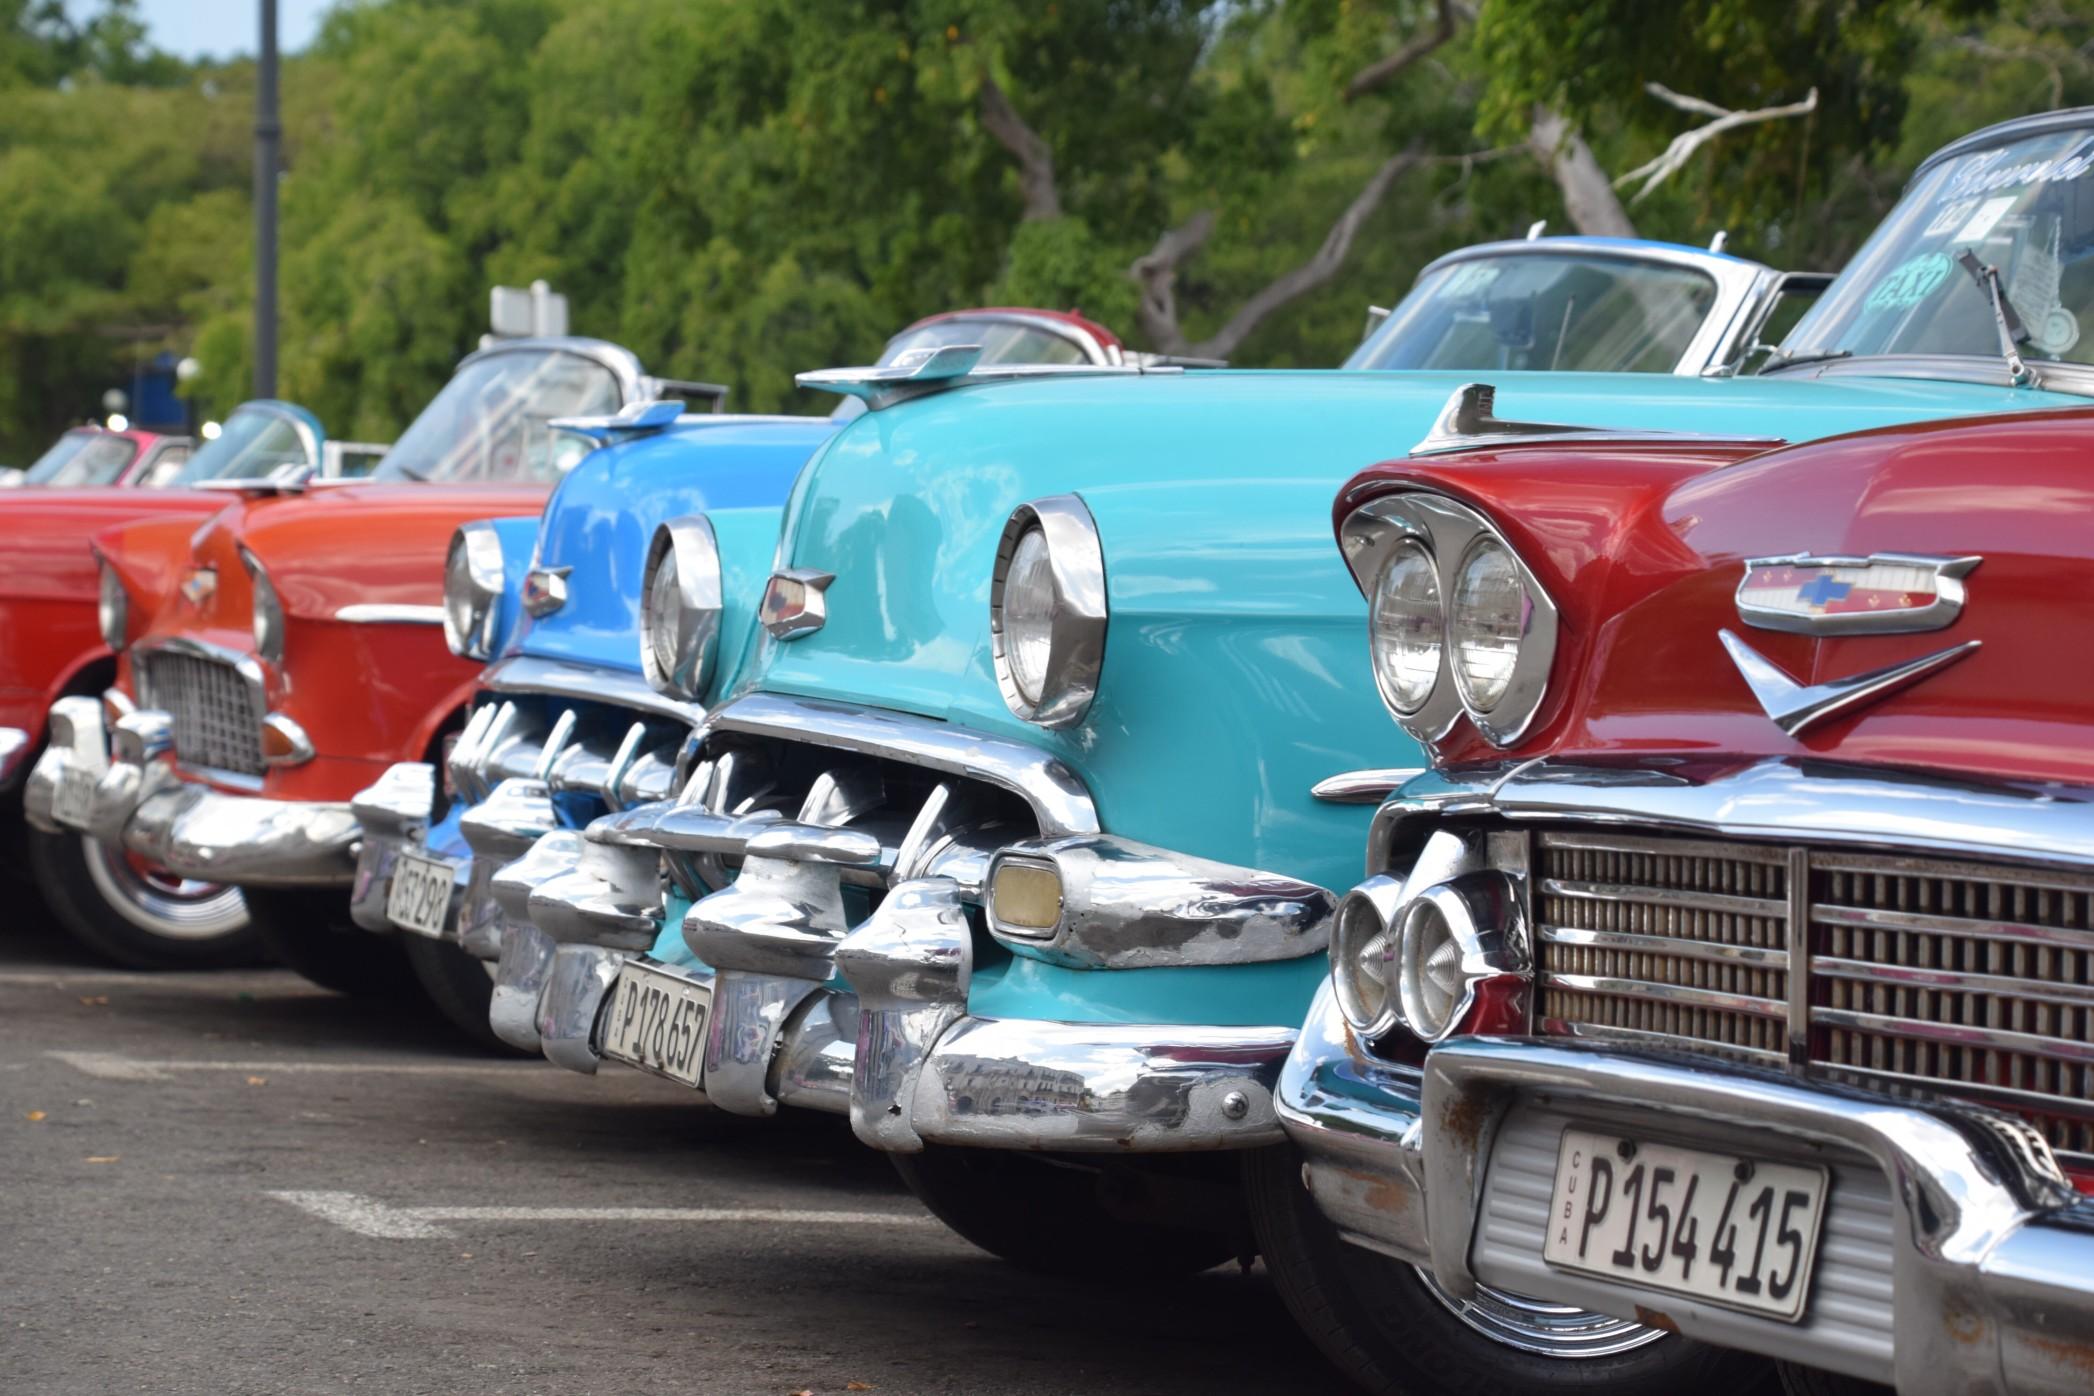 Car shows are a great way to spend an afternoon with your dad | Twenty20